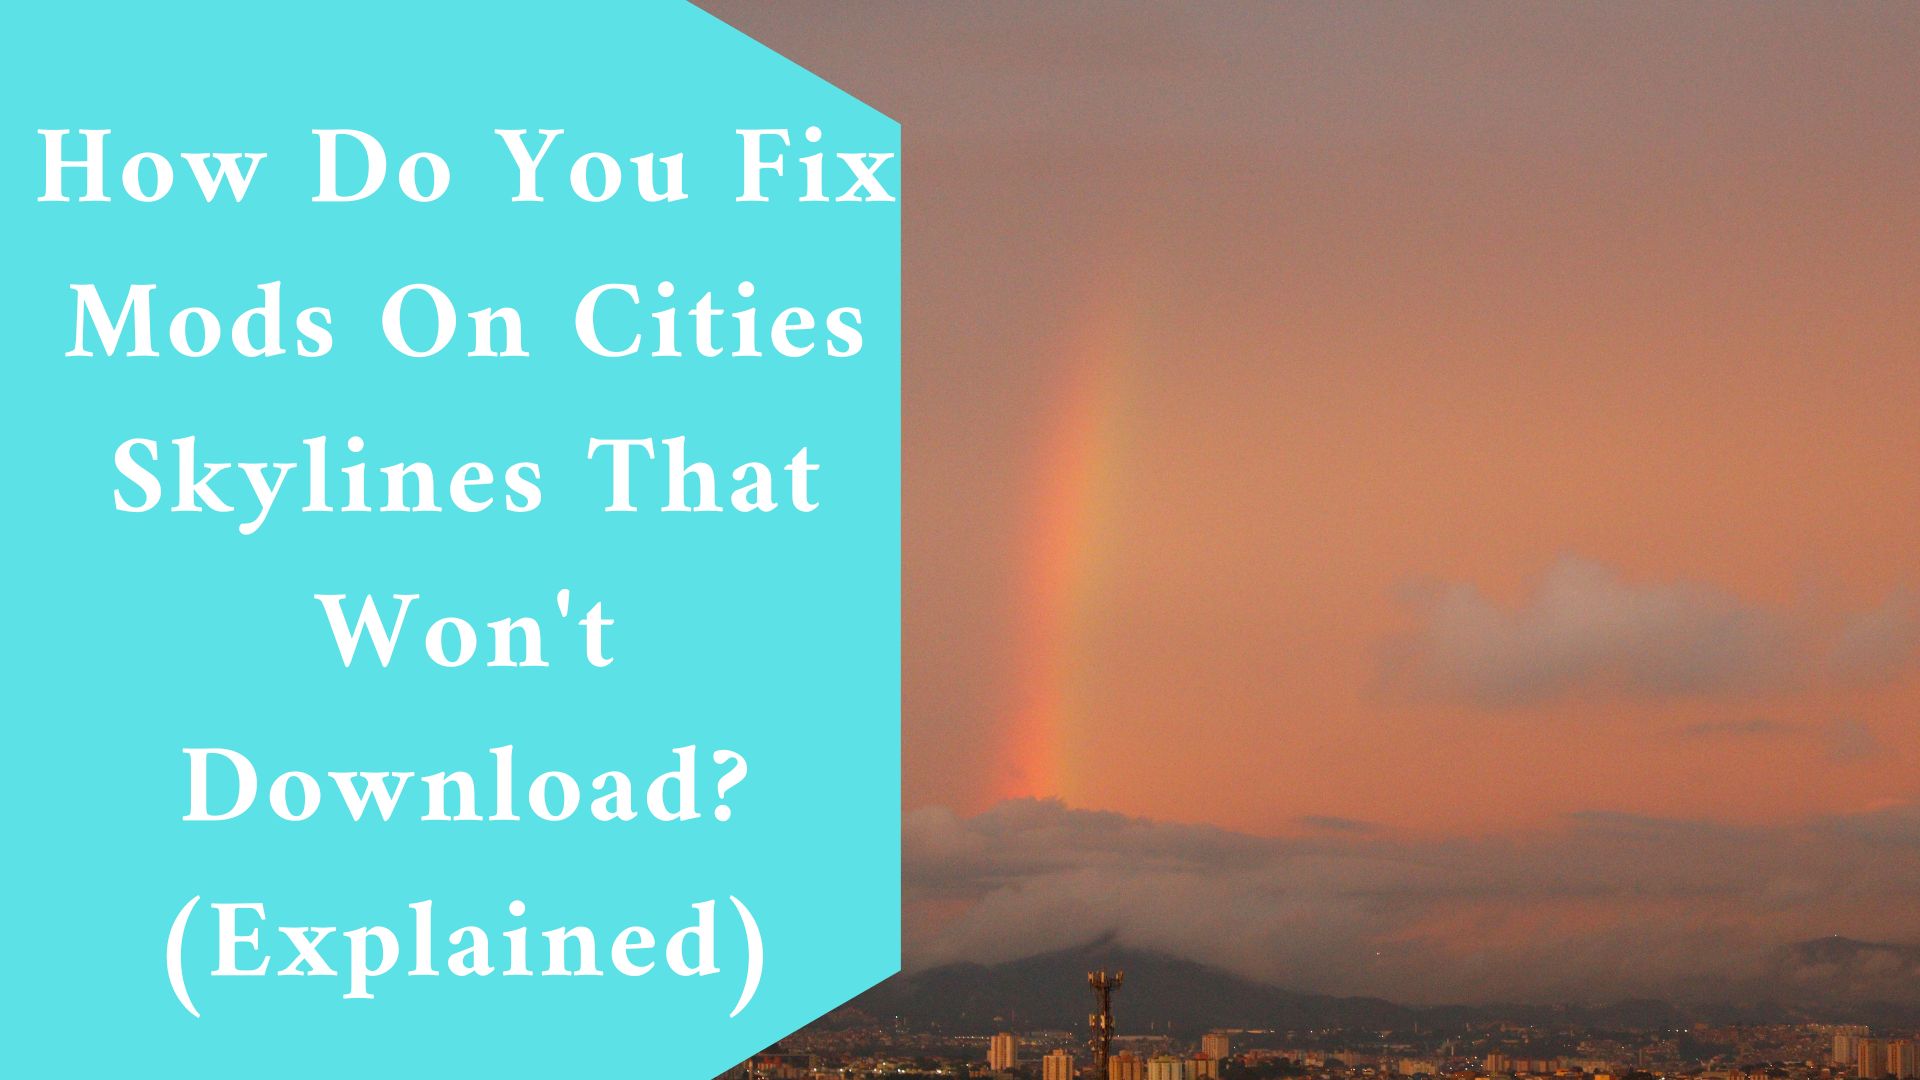 How Do You Fix Mods On Cities Skylines That Won't Download? (Explained)